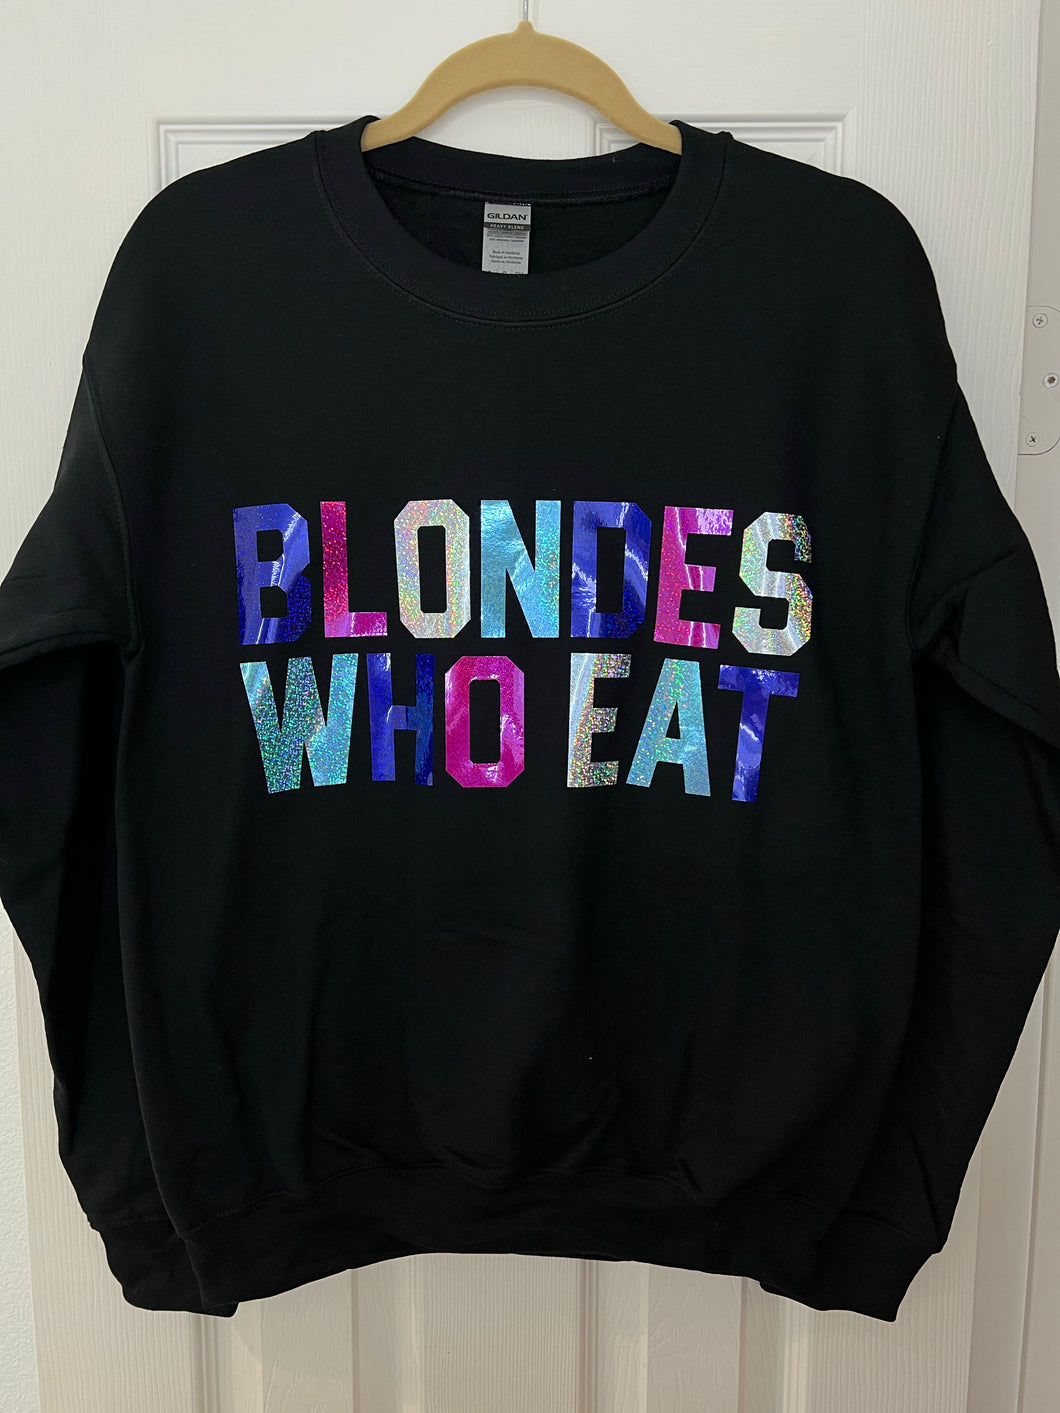 BLONDES WHO EAT BLACK W/ MULTI COLORED HOLOGRAPHIC FONT of ATHLETIC // UNISEX ADULT CREWNECK